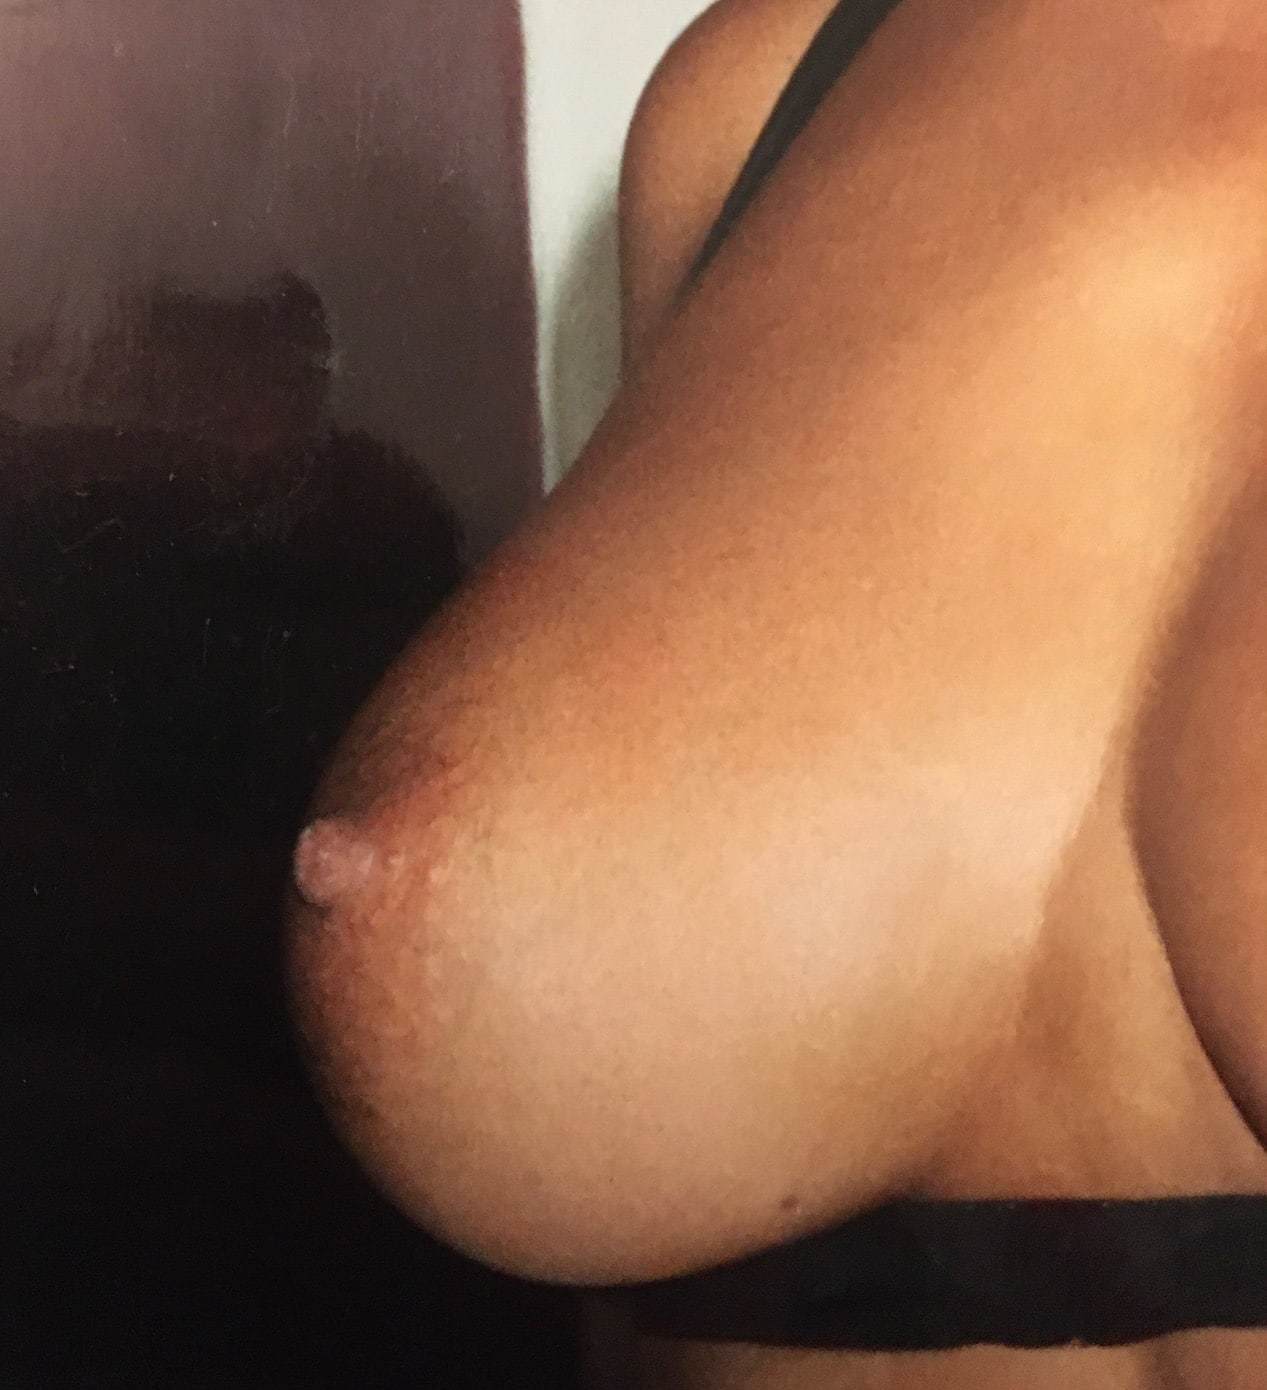 Wifes tits for you.... real nudity boobs flash